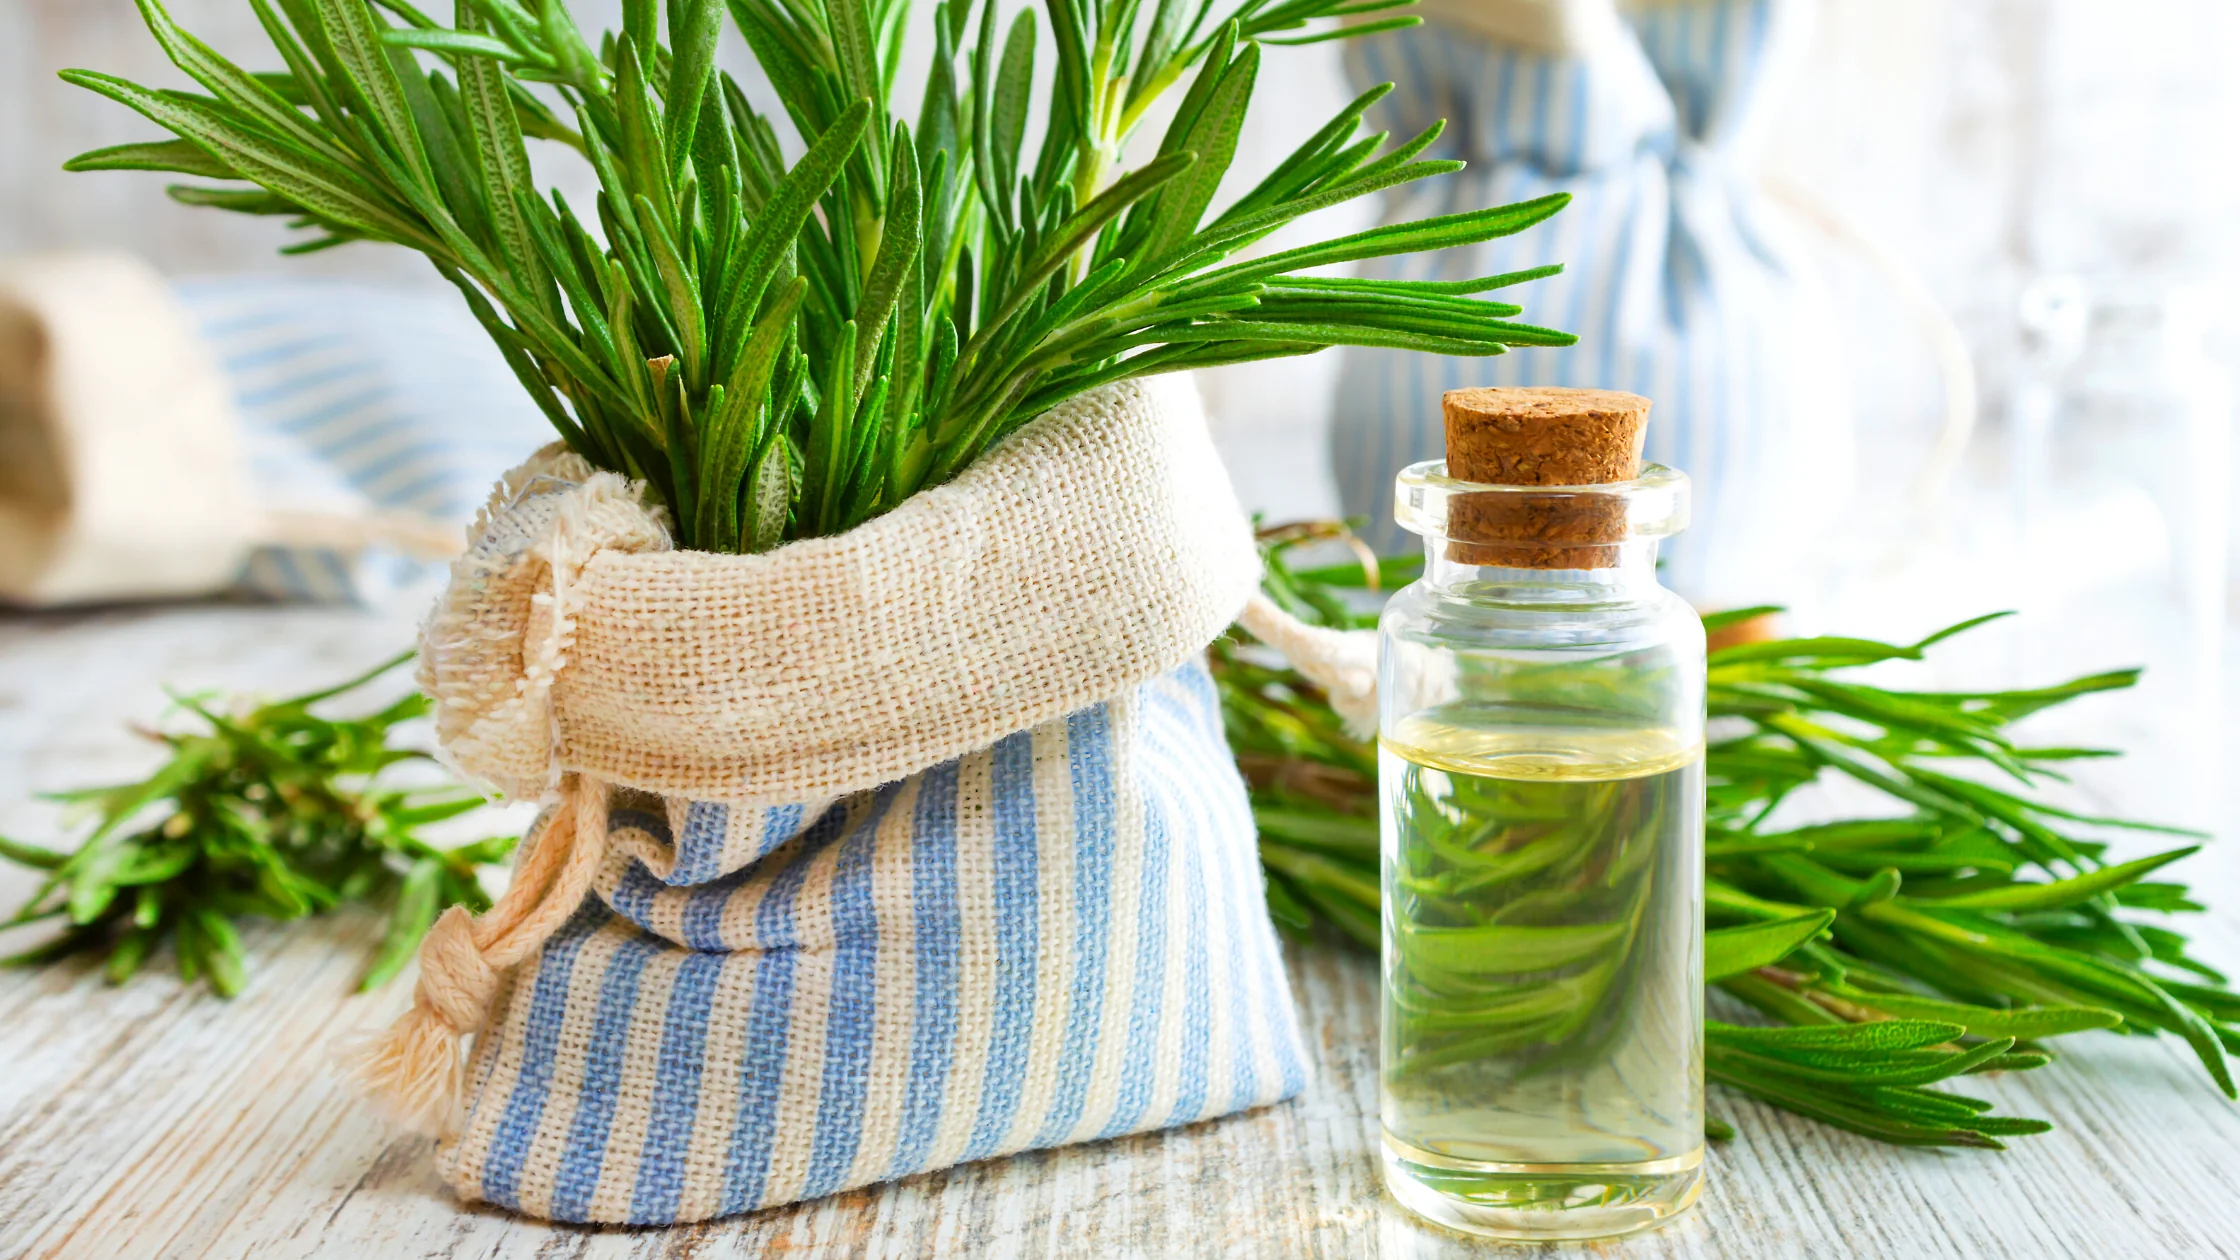 Does Rosemary Essential Oil Raise Blood Pressure?